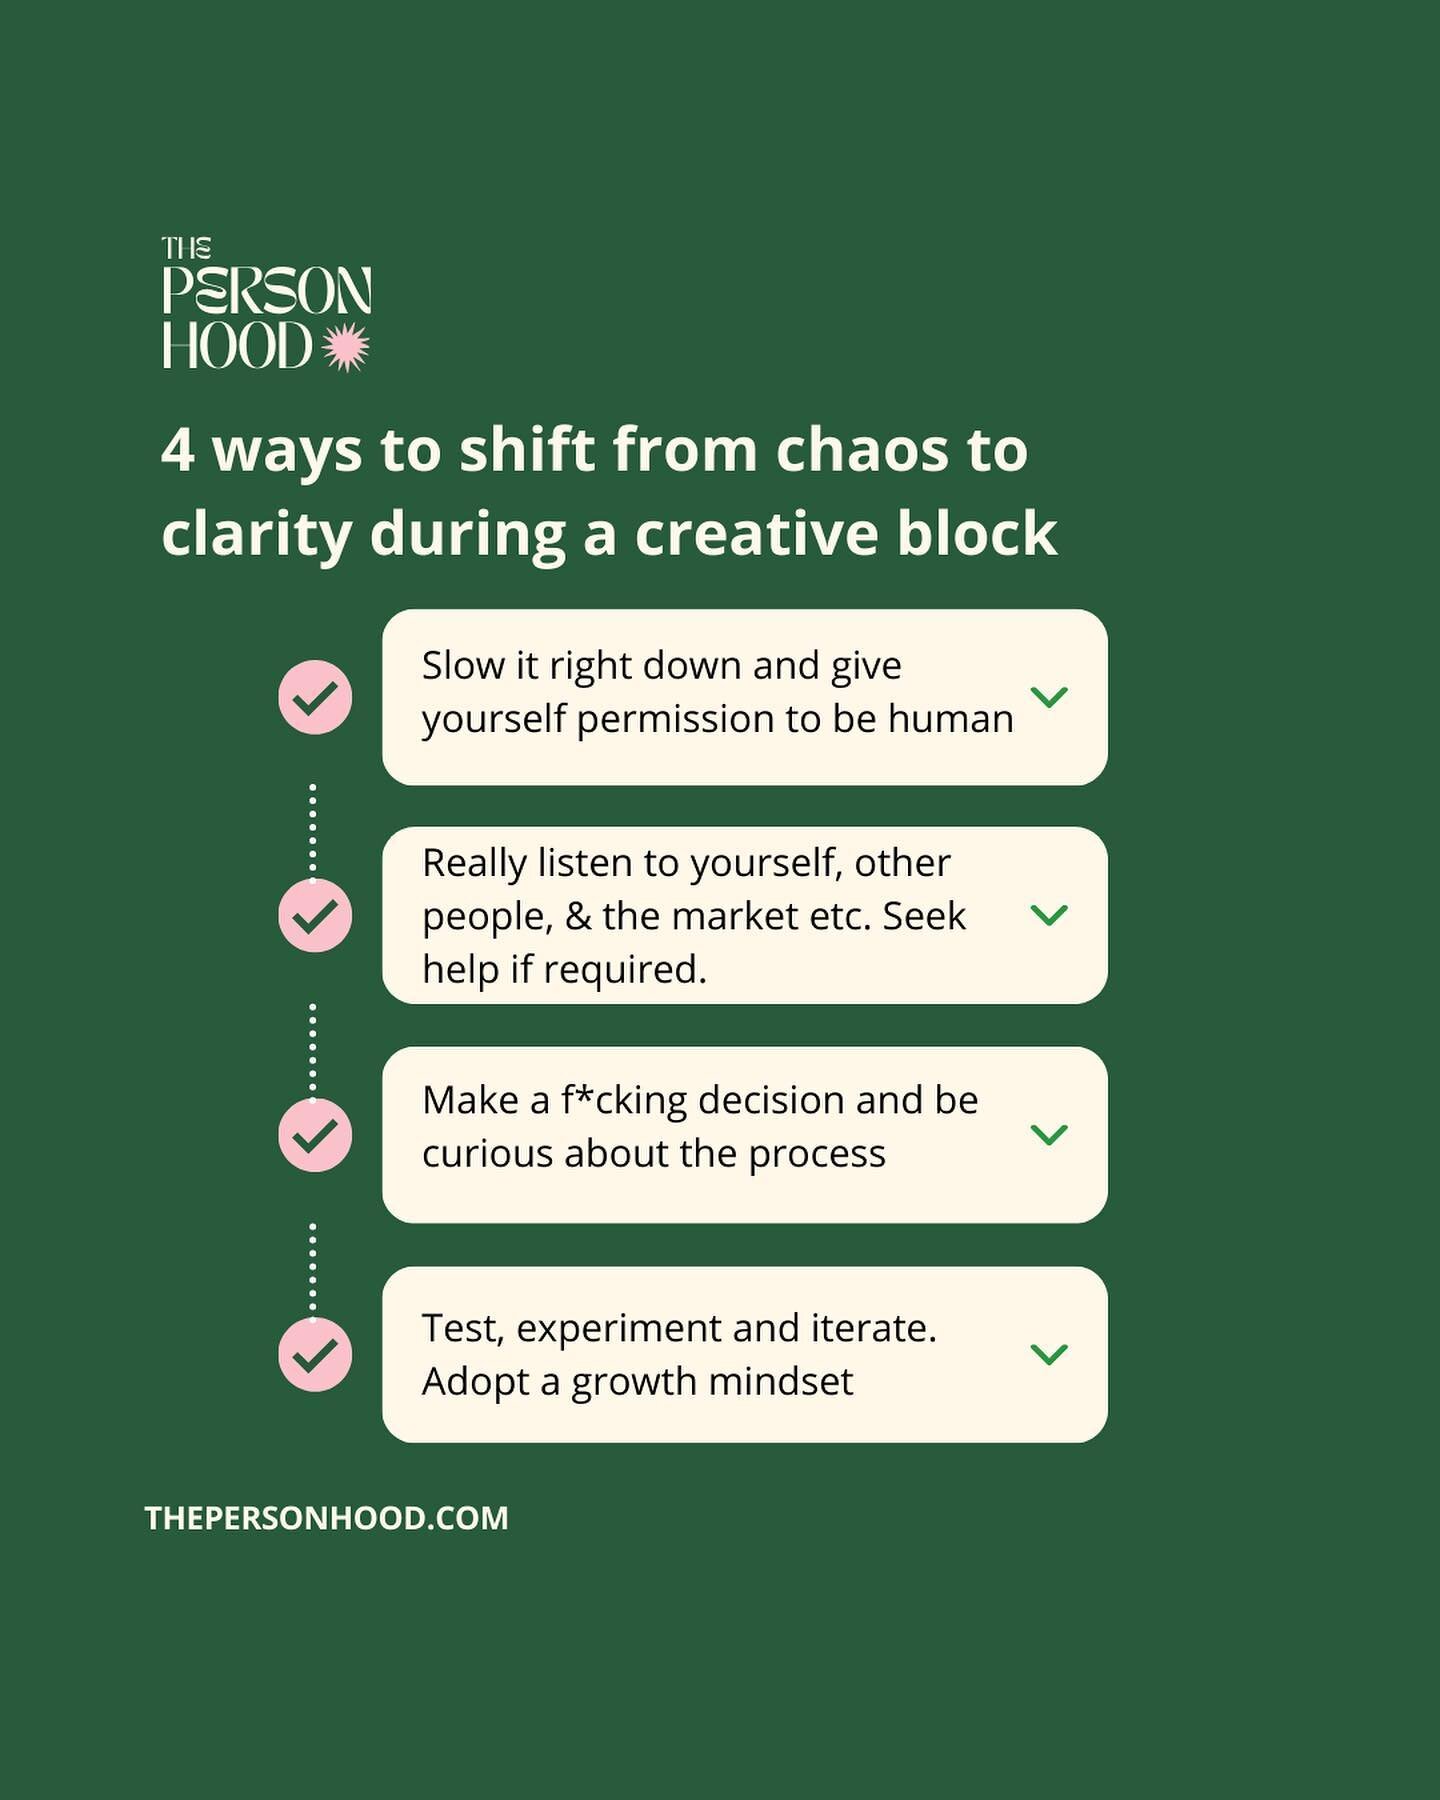 TRANSFORM YOUR THINKING ON OUR CHAOS TO CLARITY IN 90 CREATOR GROUP PROGRAM 🧠

What&rsquo;s a long-held idea or passion project that you&rsquo;ve been nurturing for years? ⚡️

Or perhaps there&rsquo;s a challenge itching to be solved, be it for your